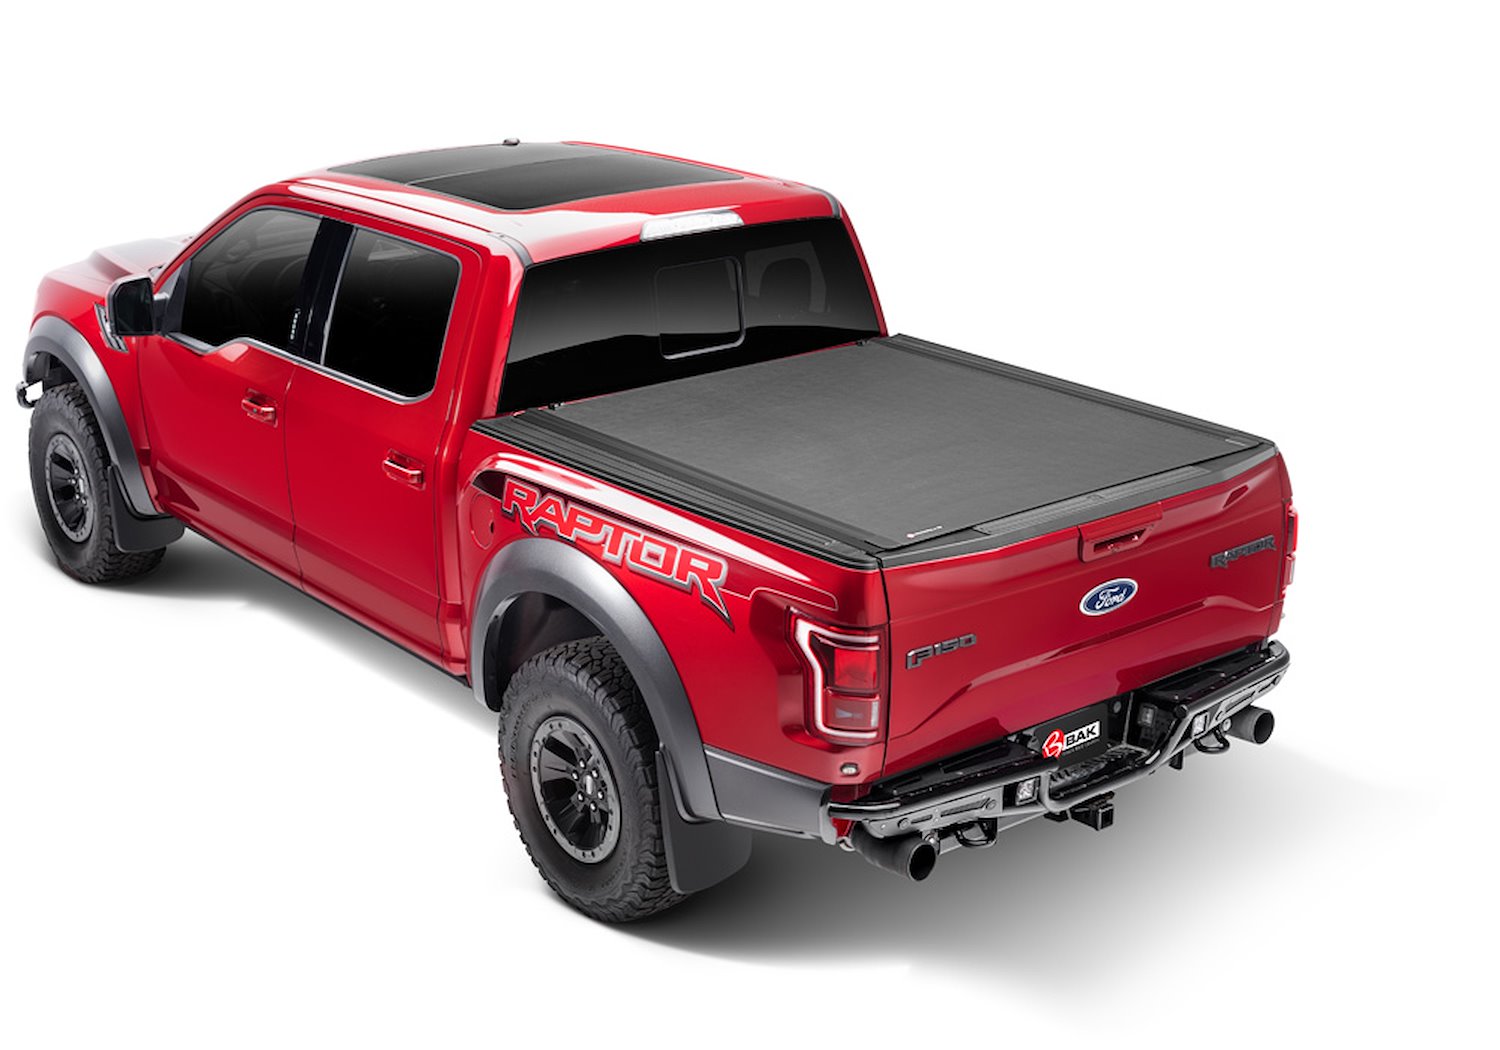 80440 Revolver X4s for Fits Select Toyota Tundra 5.6 ft. Bed, Roll-Up Hard Cover Style [Black Finish]